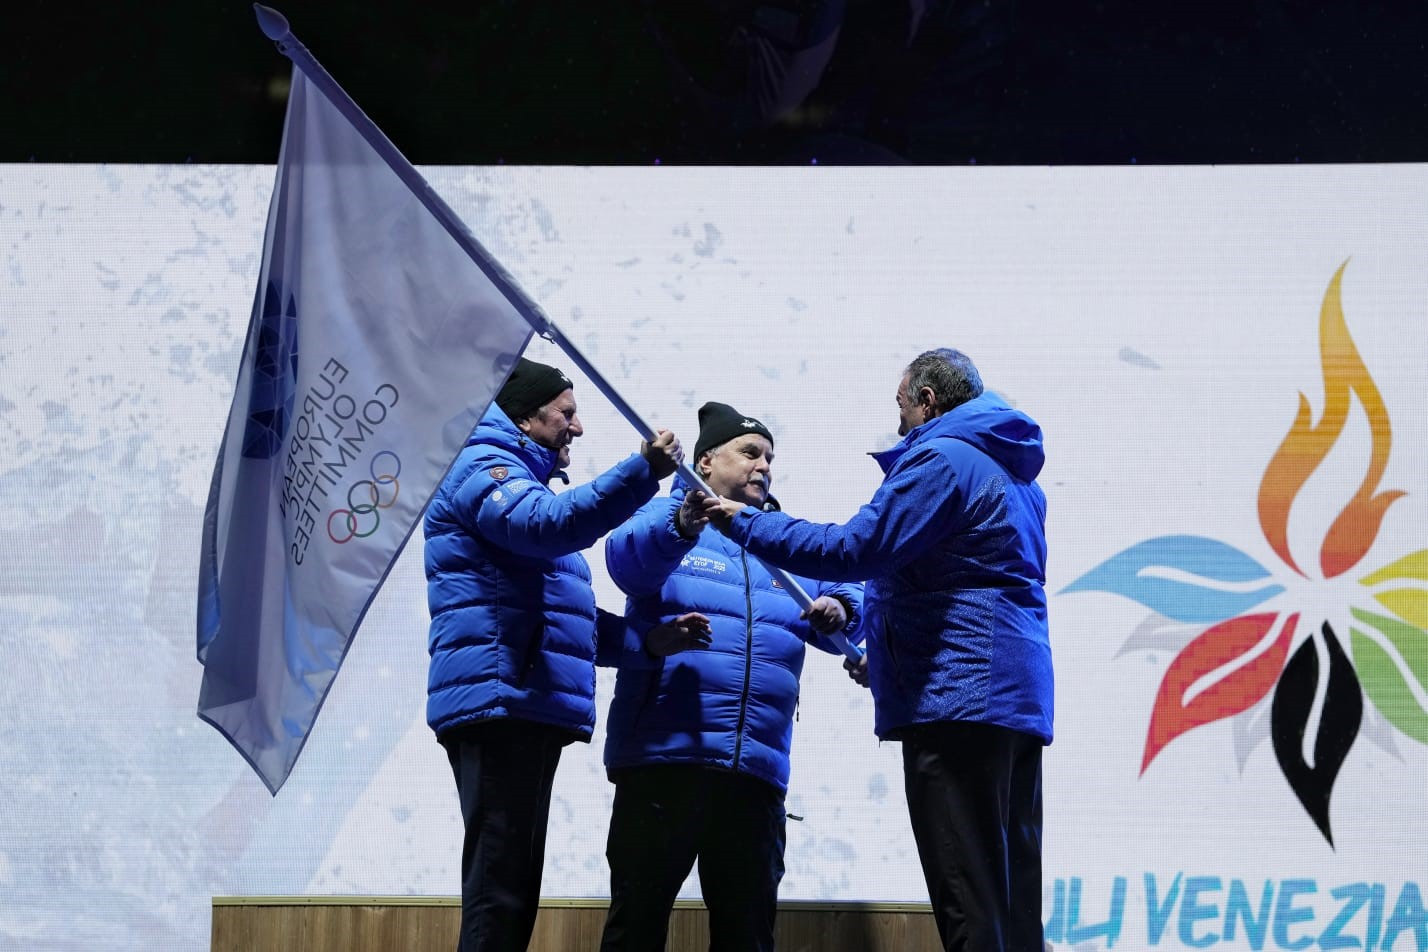 The European Olympic Committees flag was handed over to organisers of next year's Winter European Youth Olympic Festival in Friuli Venezia Giulia ©Ignacio Casares